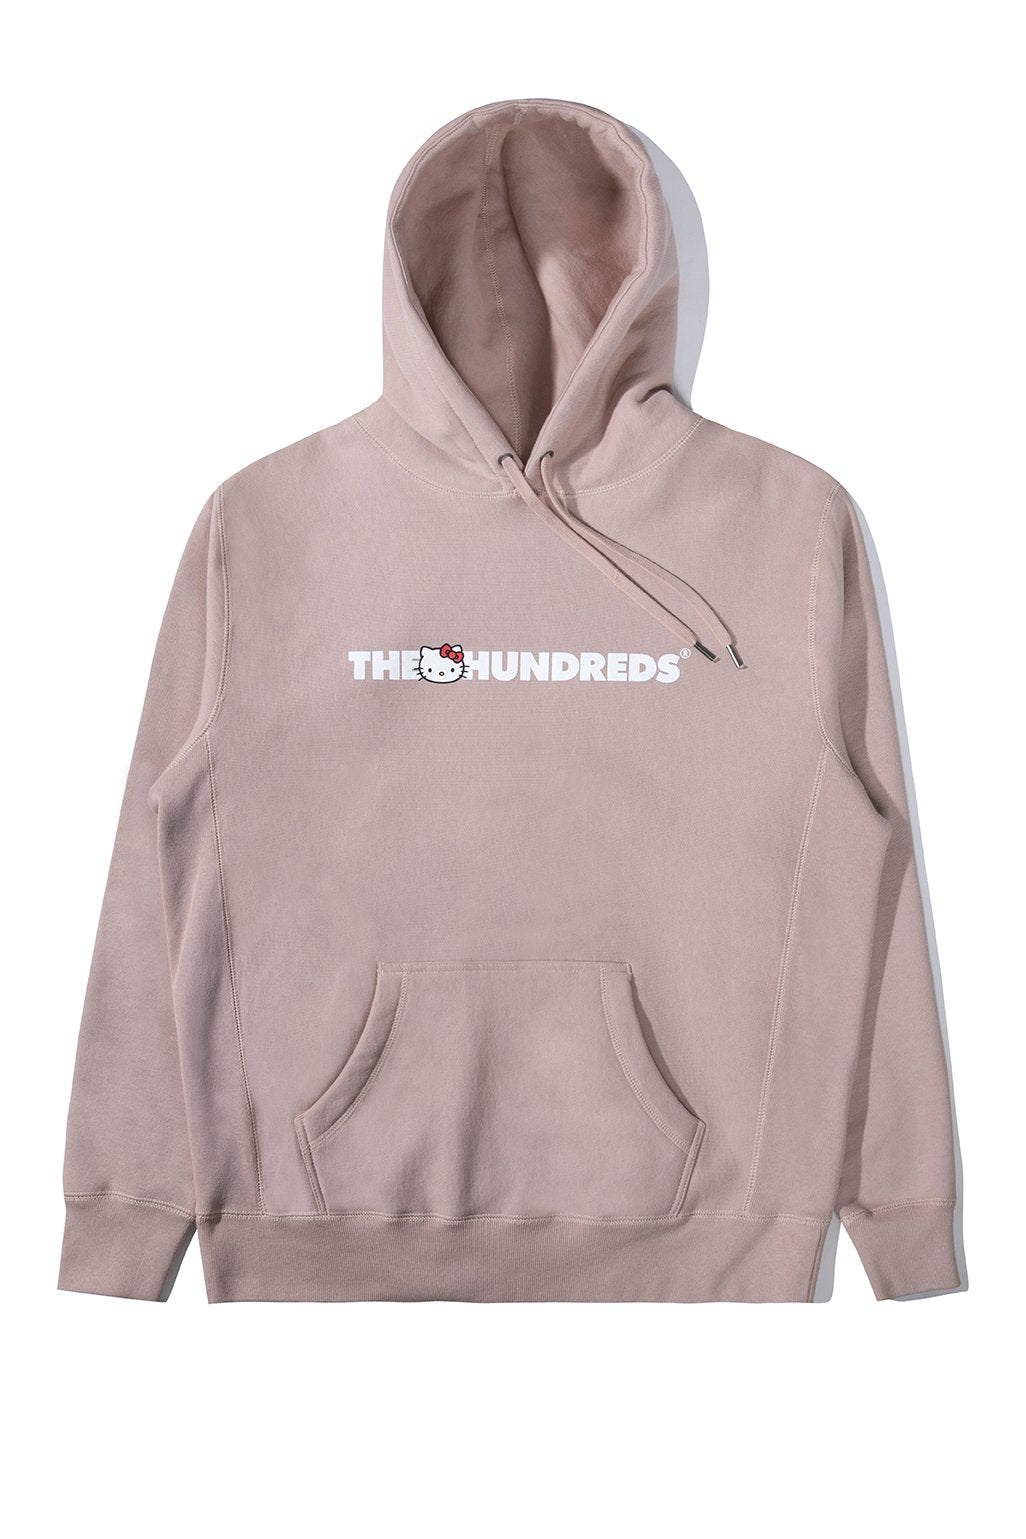 The Hundreds x Sanrio Crew Pullover in Dusty Pink